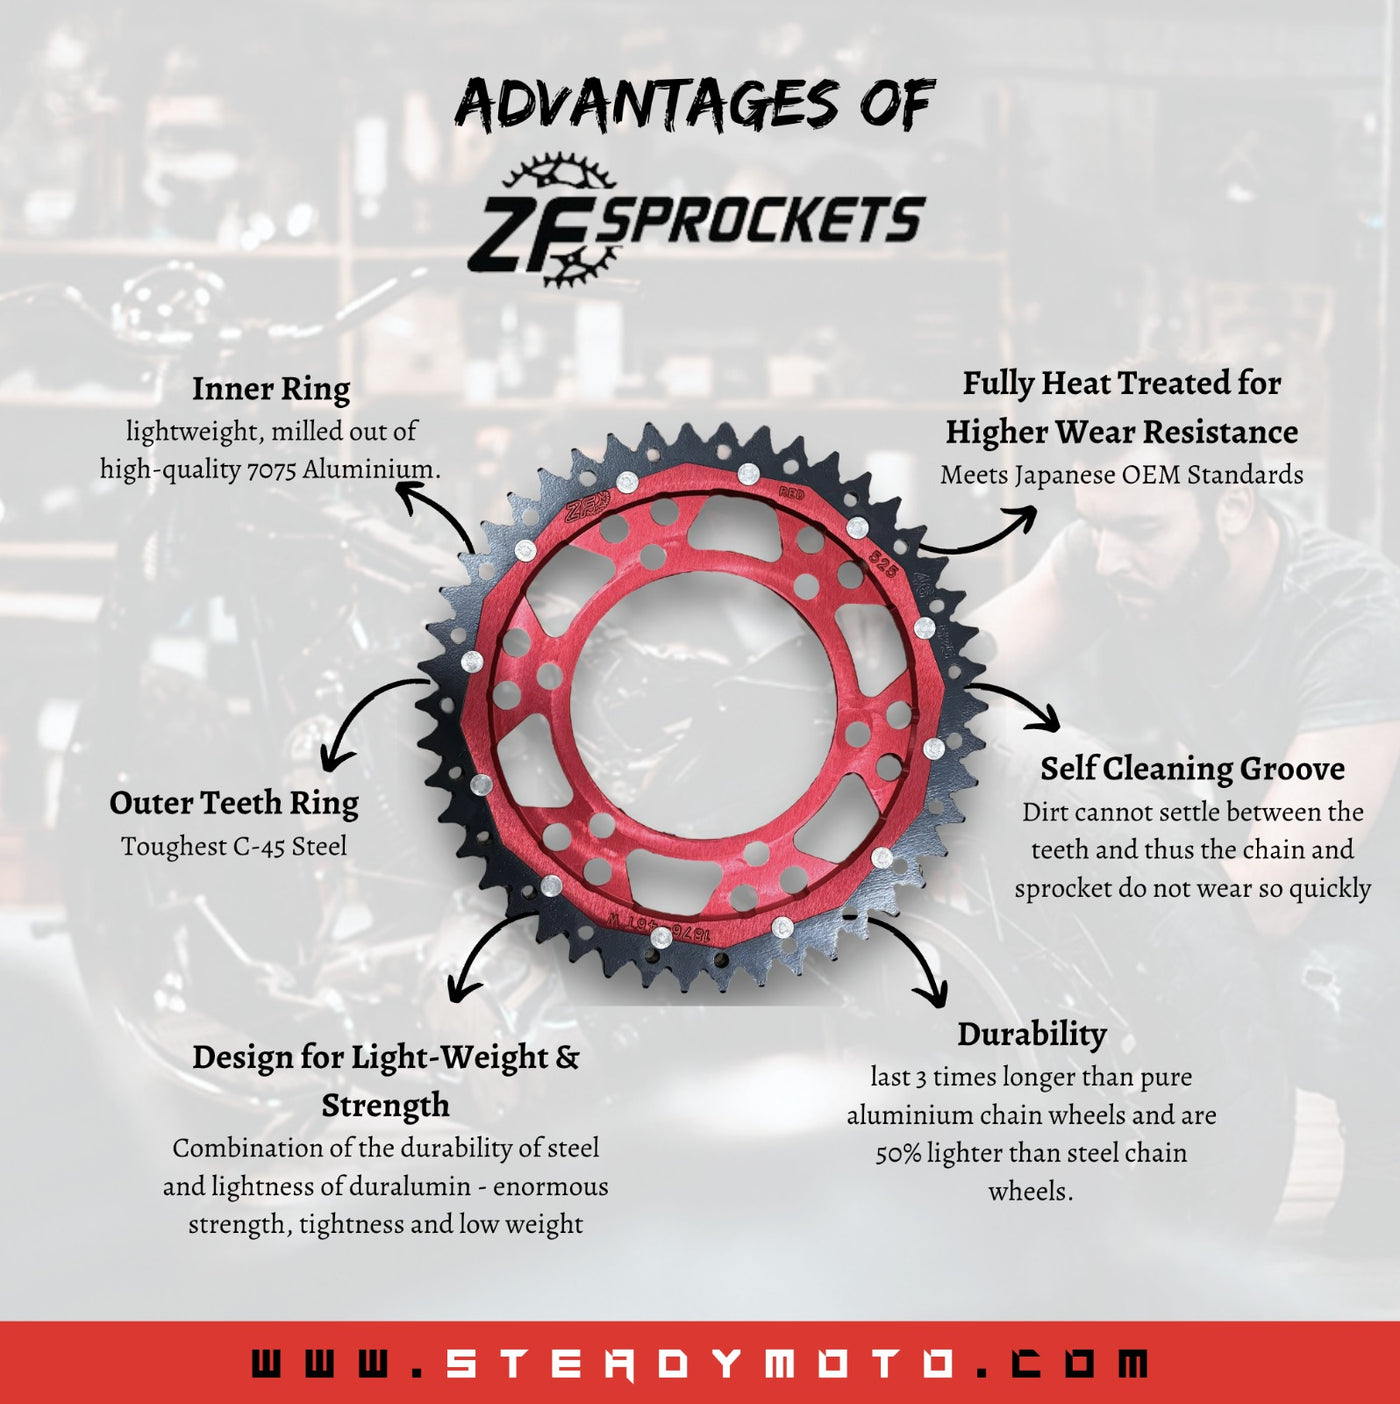 ZF Rear Sprocket for Selected Off-Road Bikes